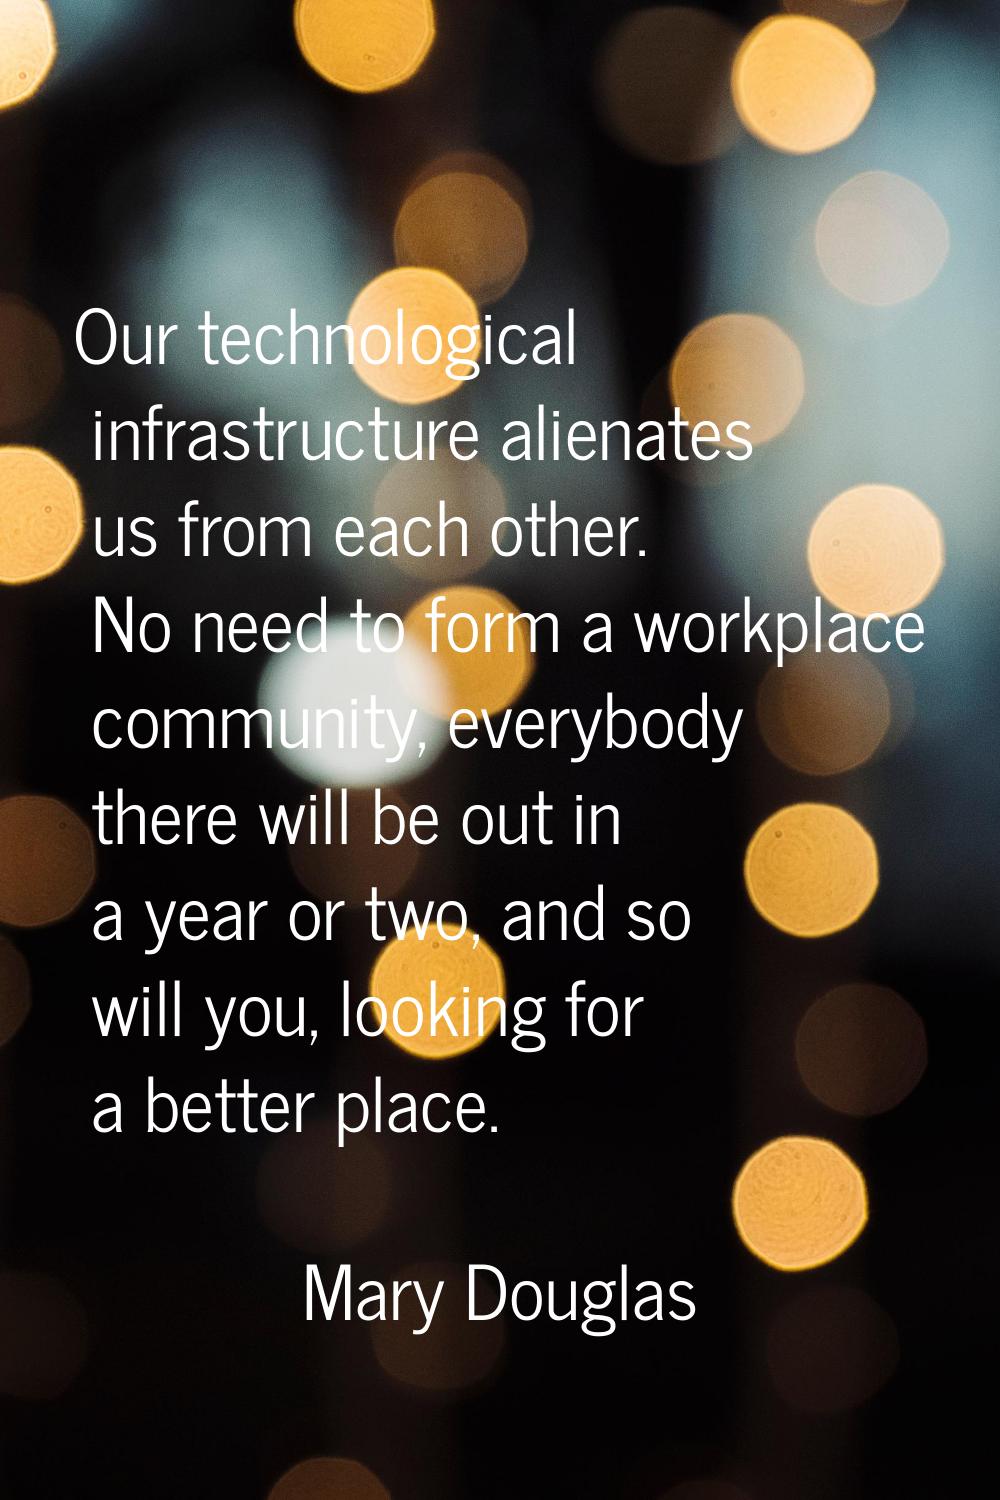 Our technological infrastructure alienates us from each other. No need to form a workplace communit